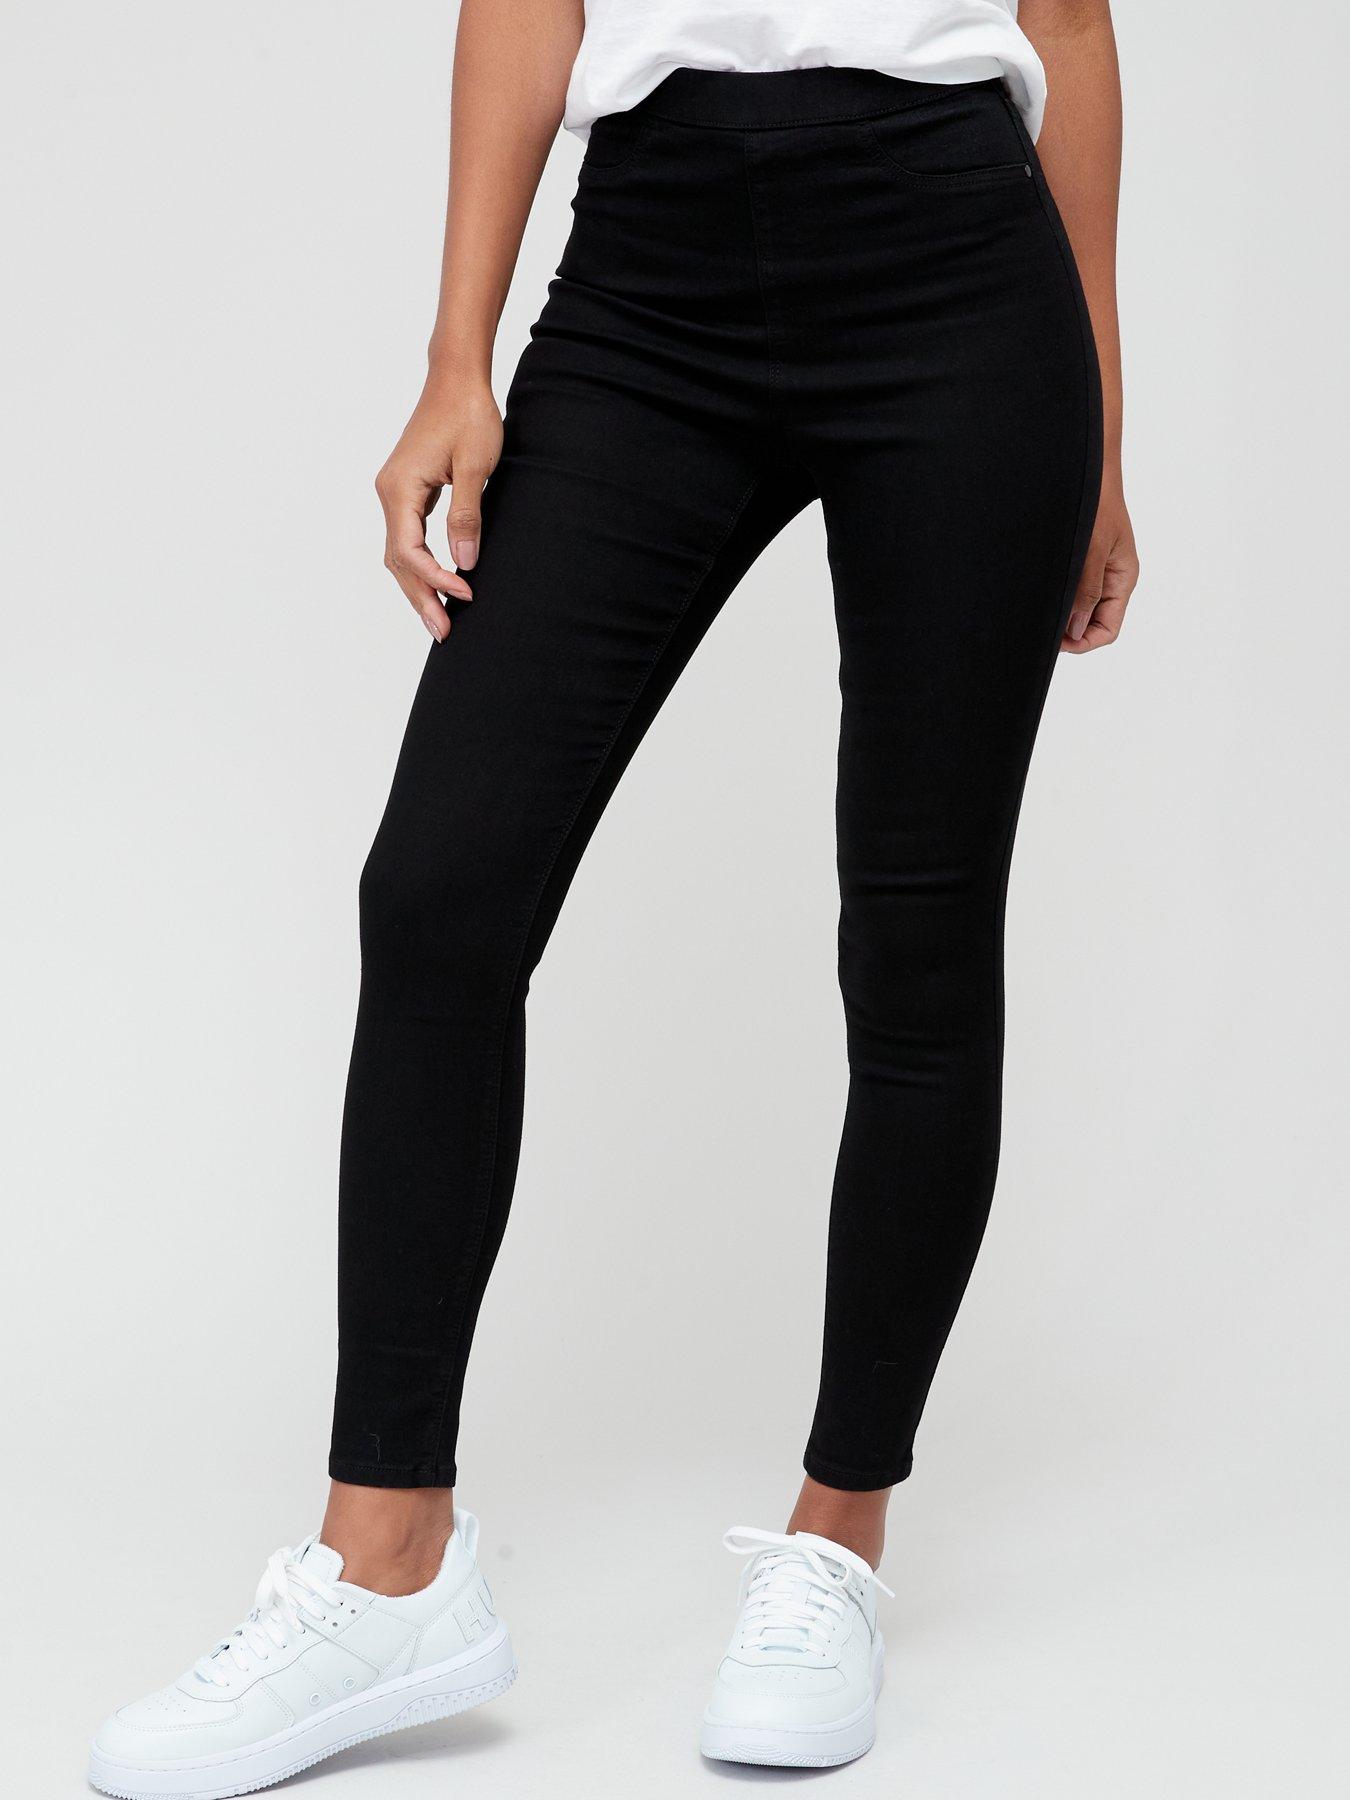 Know That You're Home Jeggings, Medium Wash – Chic Soul